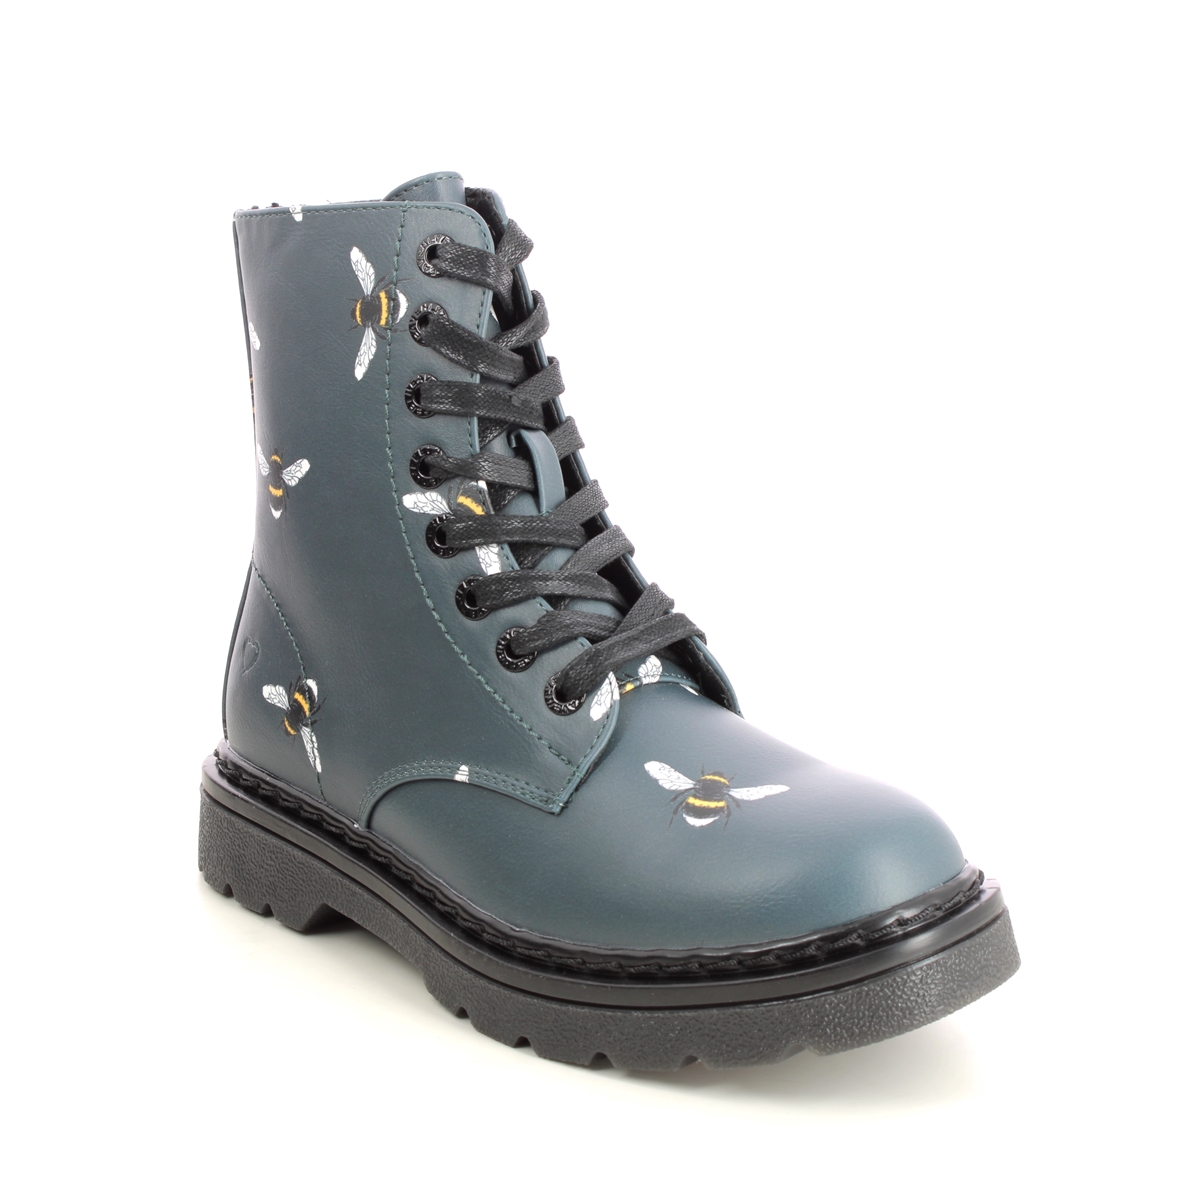 Heavenly Feet Justina 2 Bee Teal Blue Womens Biker Boots 3501-73 In Size 3 In Plain Teal Blue